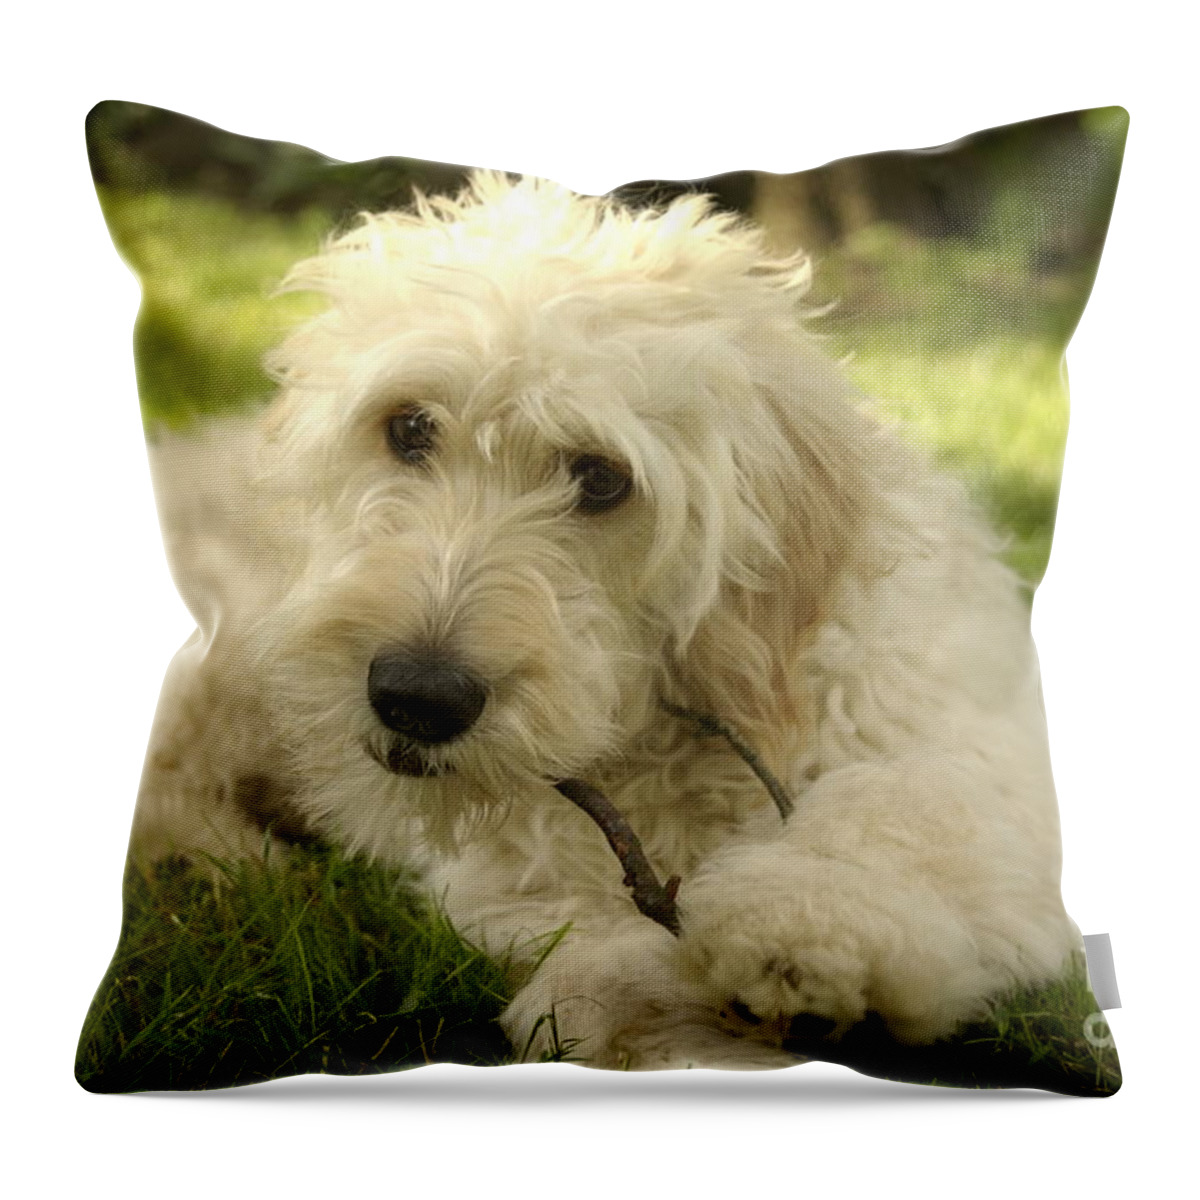 Dog Throw Pillow featuring the photograph Goldendoodle Puppy and Stick by Anna Lisa Yoder